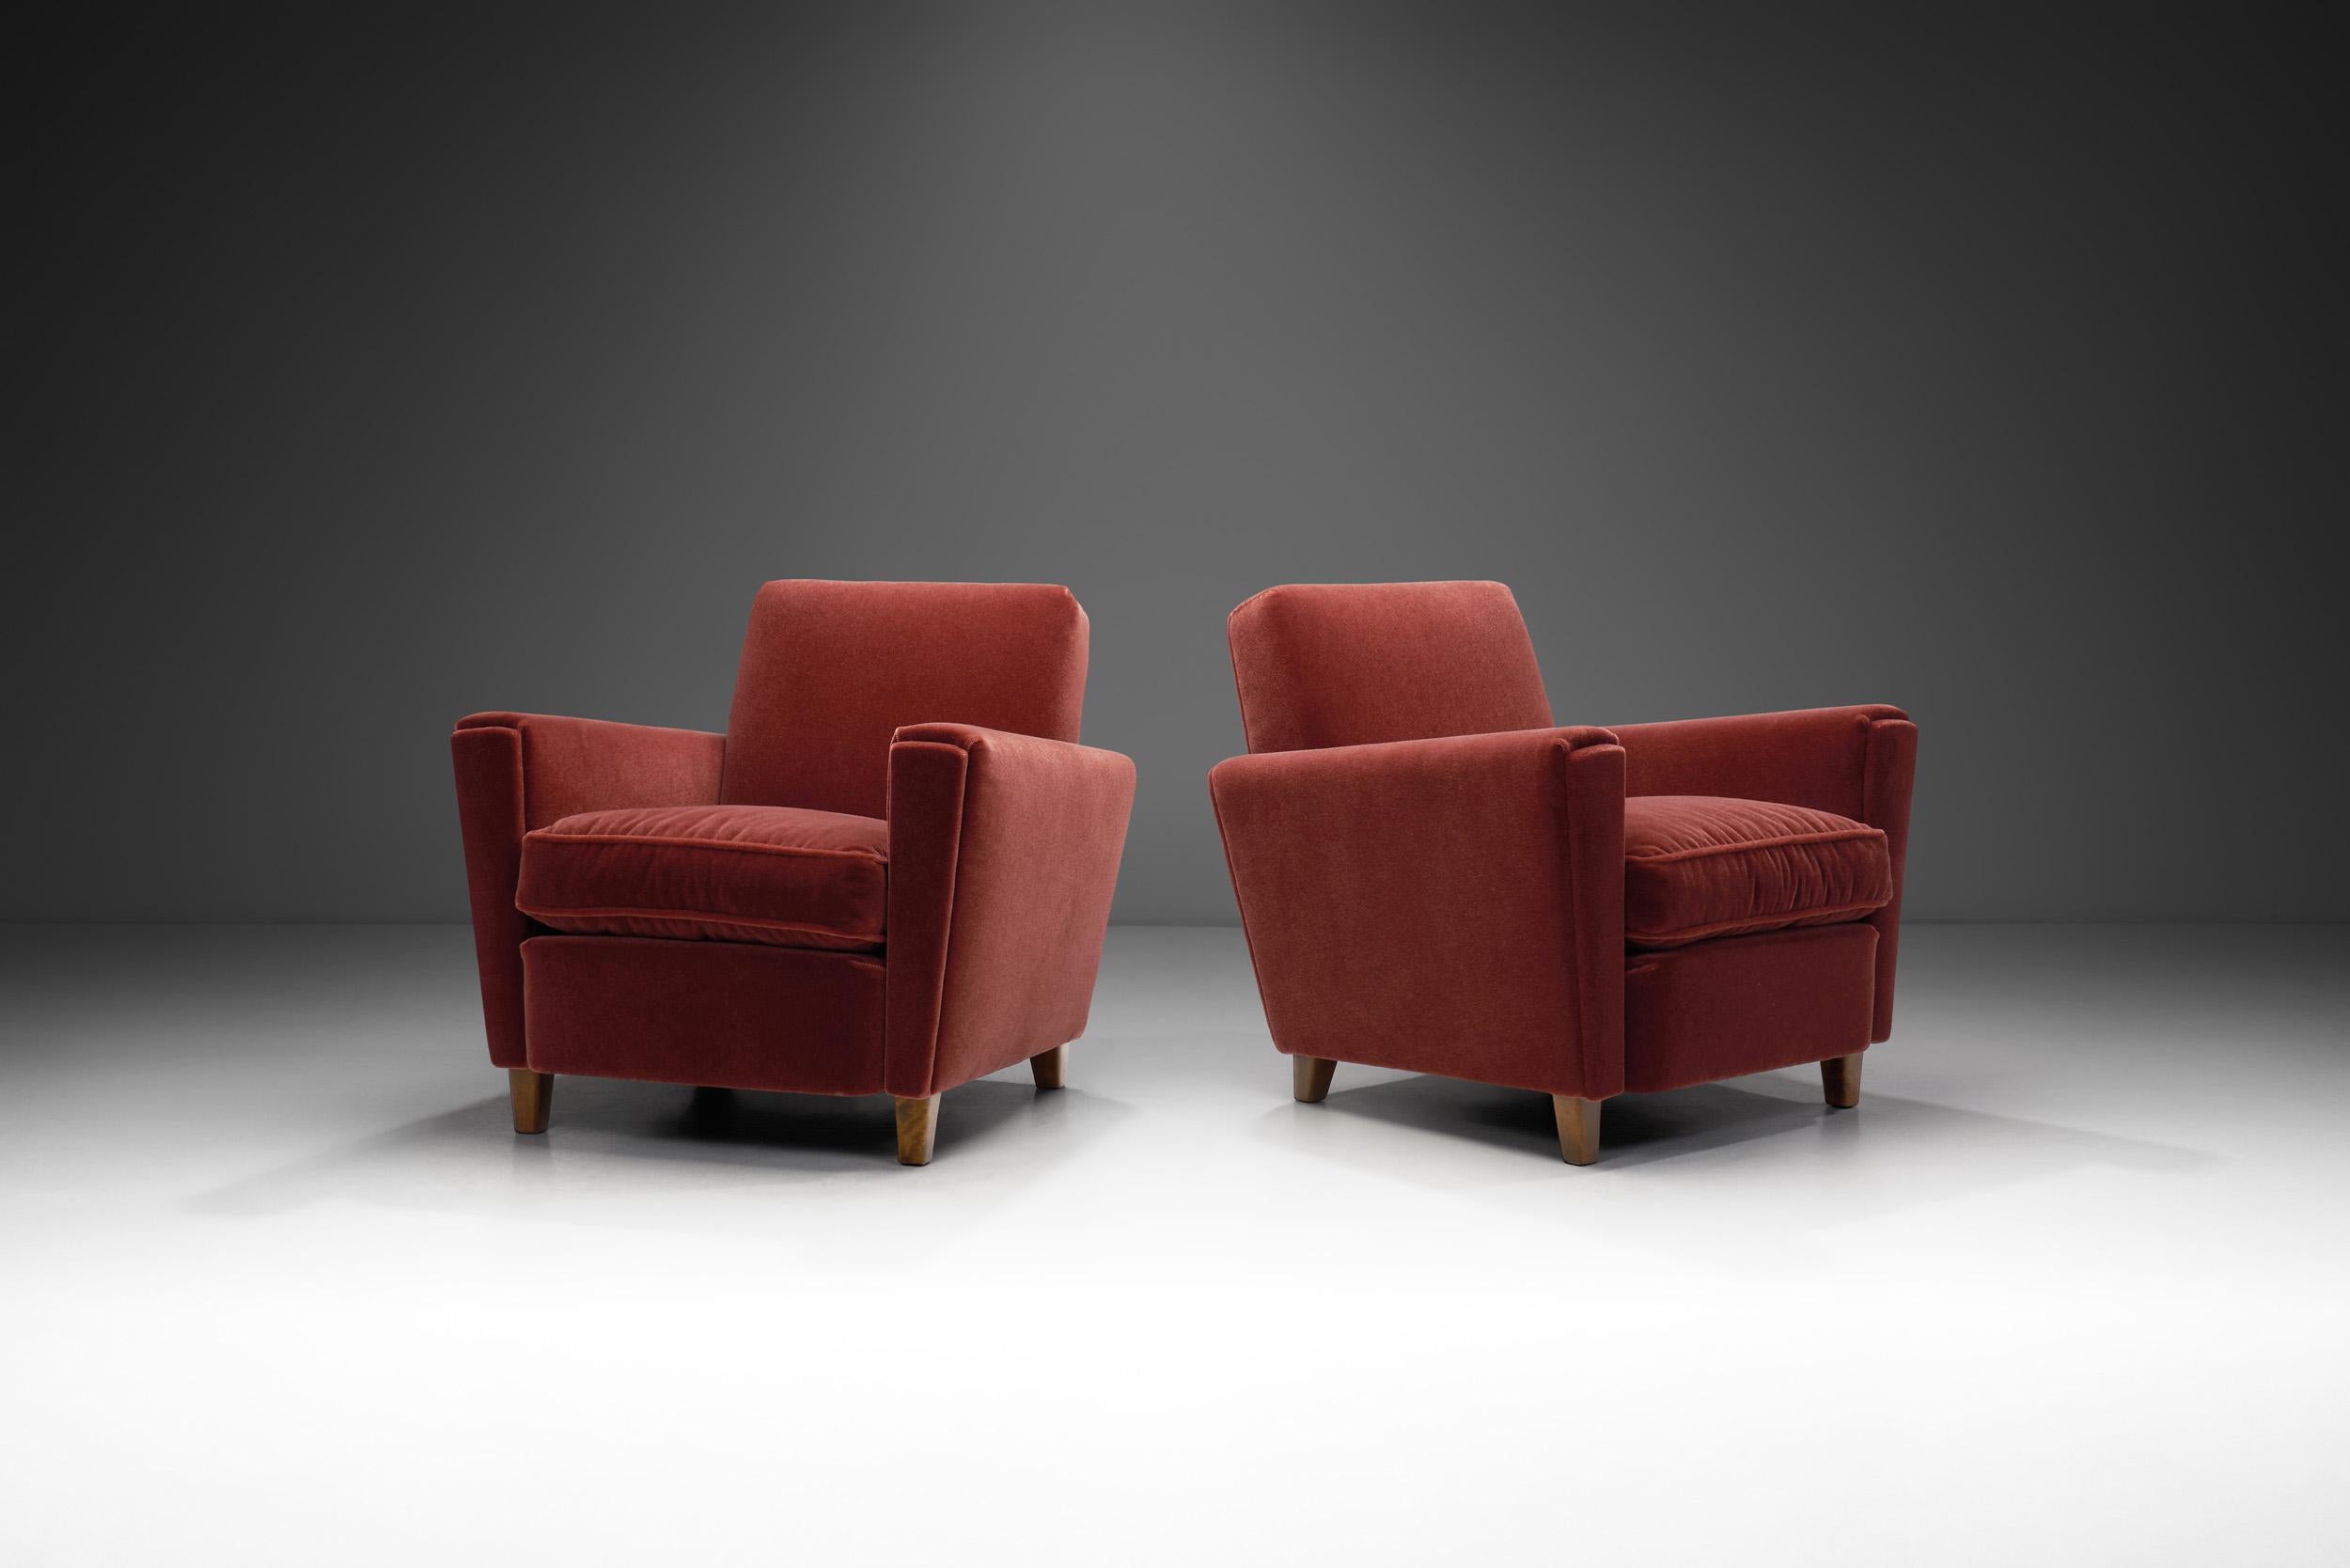 While the first half of the 1940s was still influenced by the designs of the previous decades, the second half set the stage for the Mid-Century Modern design of the 1950s that’s been still increasing in popularity. This pair has the best visual